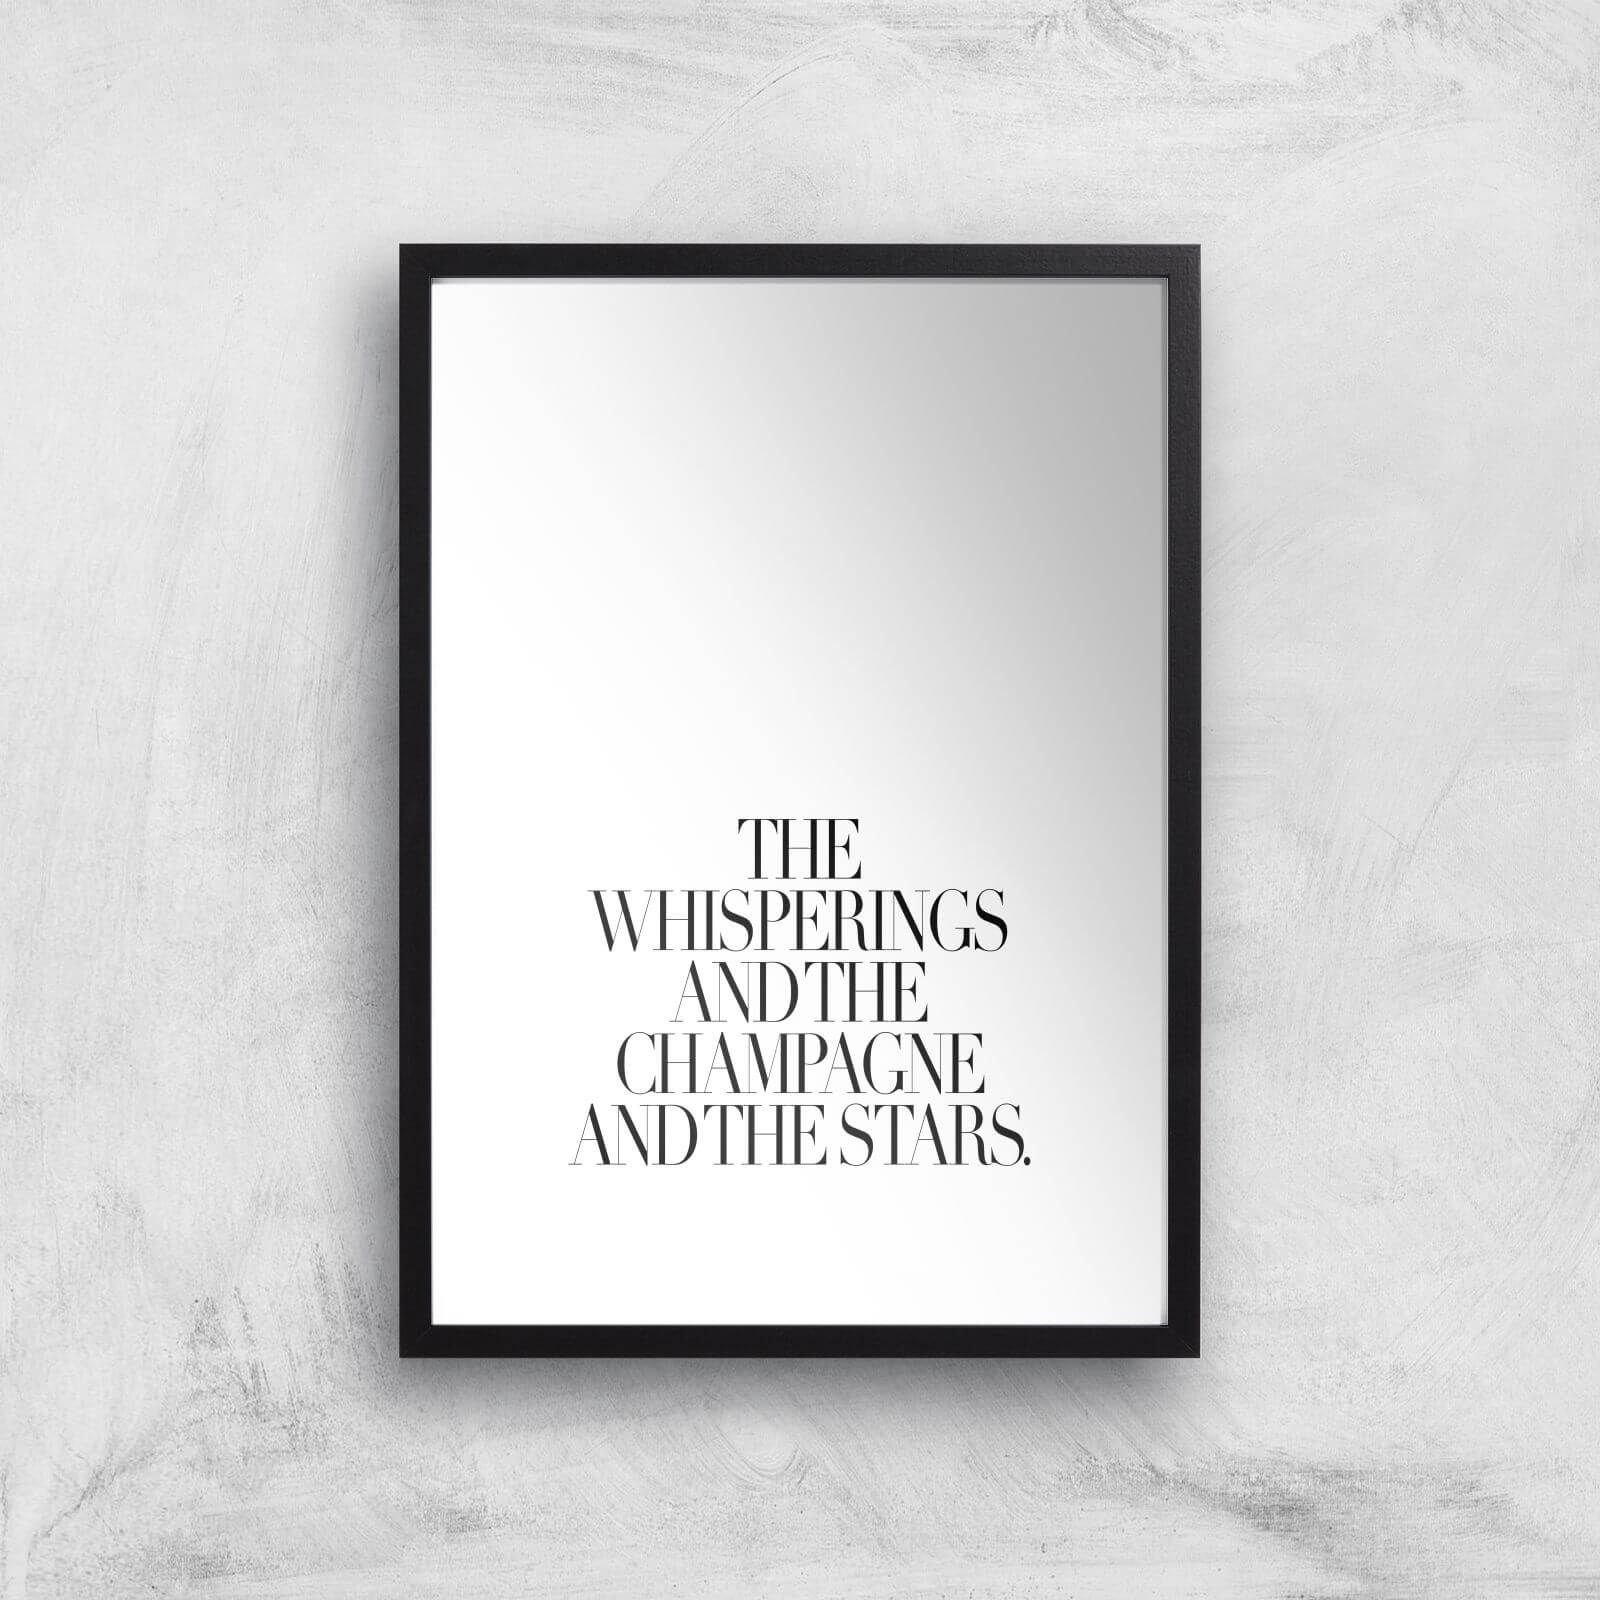 The Whisperings And The Champagne Giclee Art Print - A3 - Black Frame